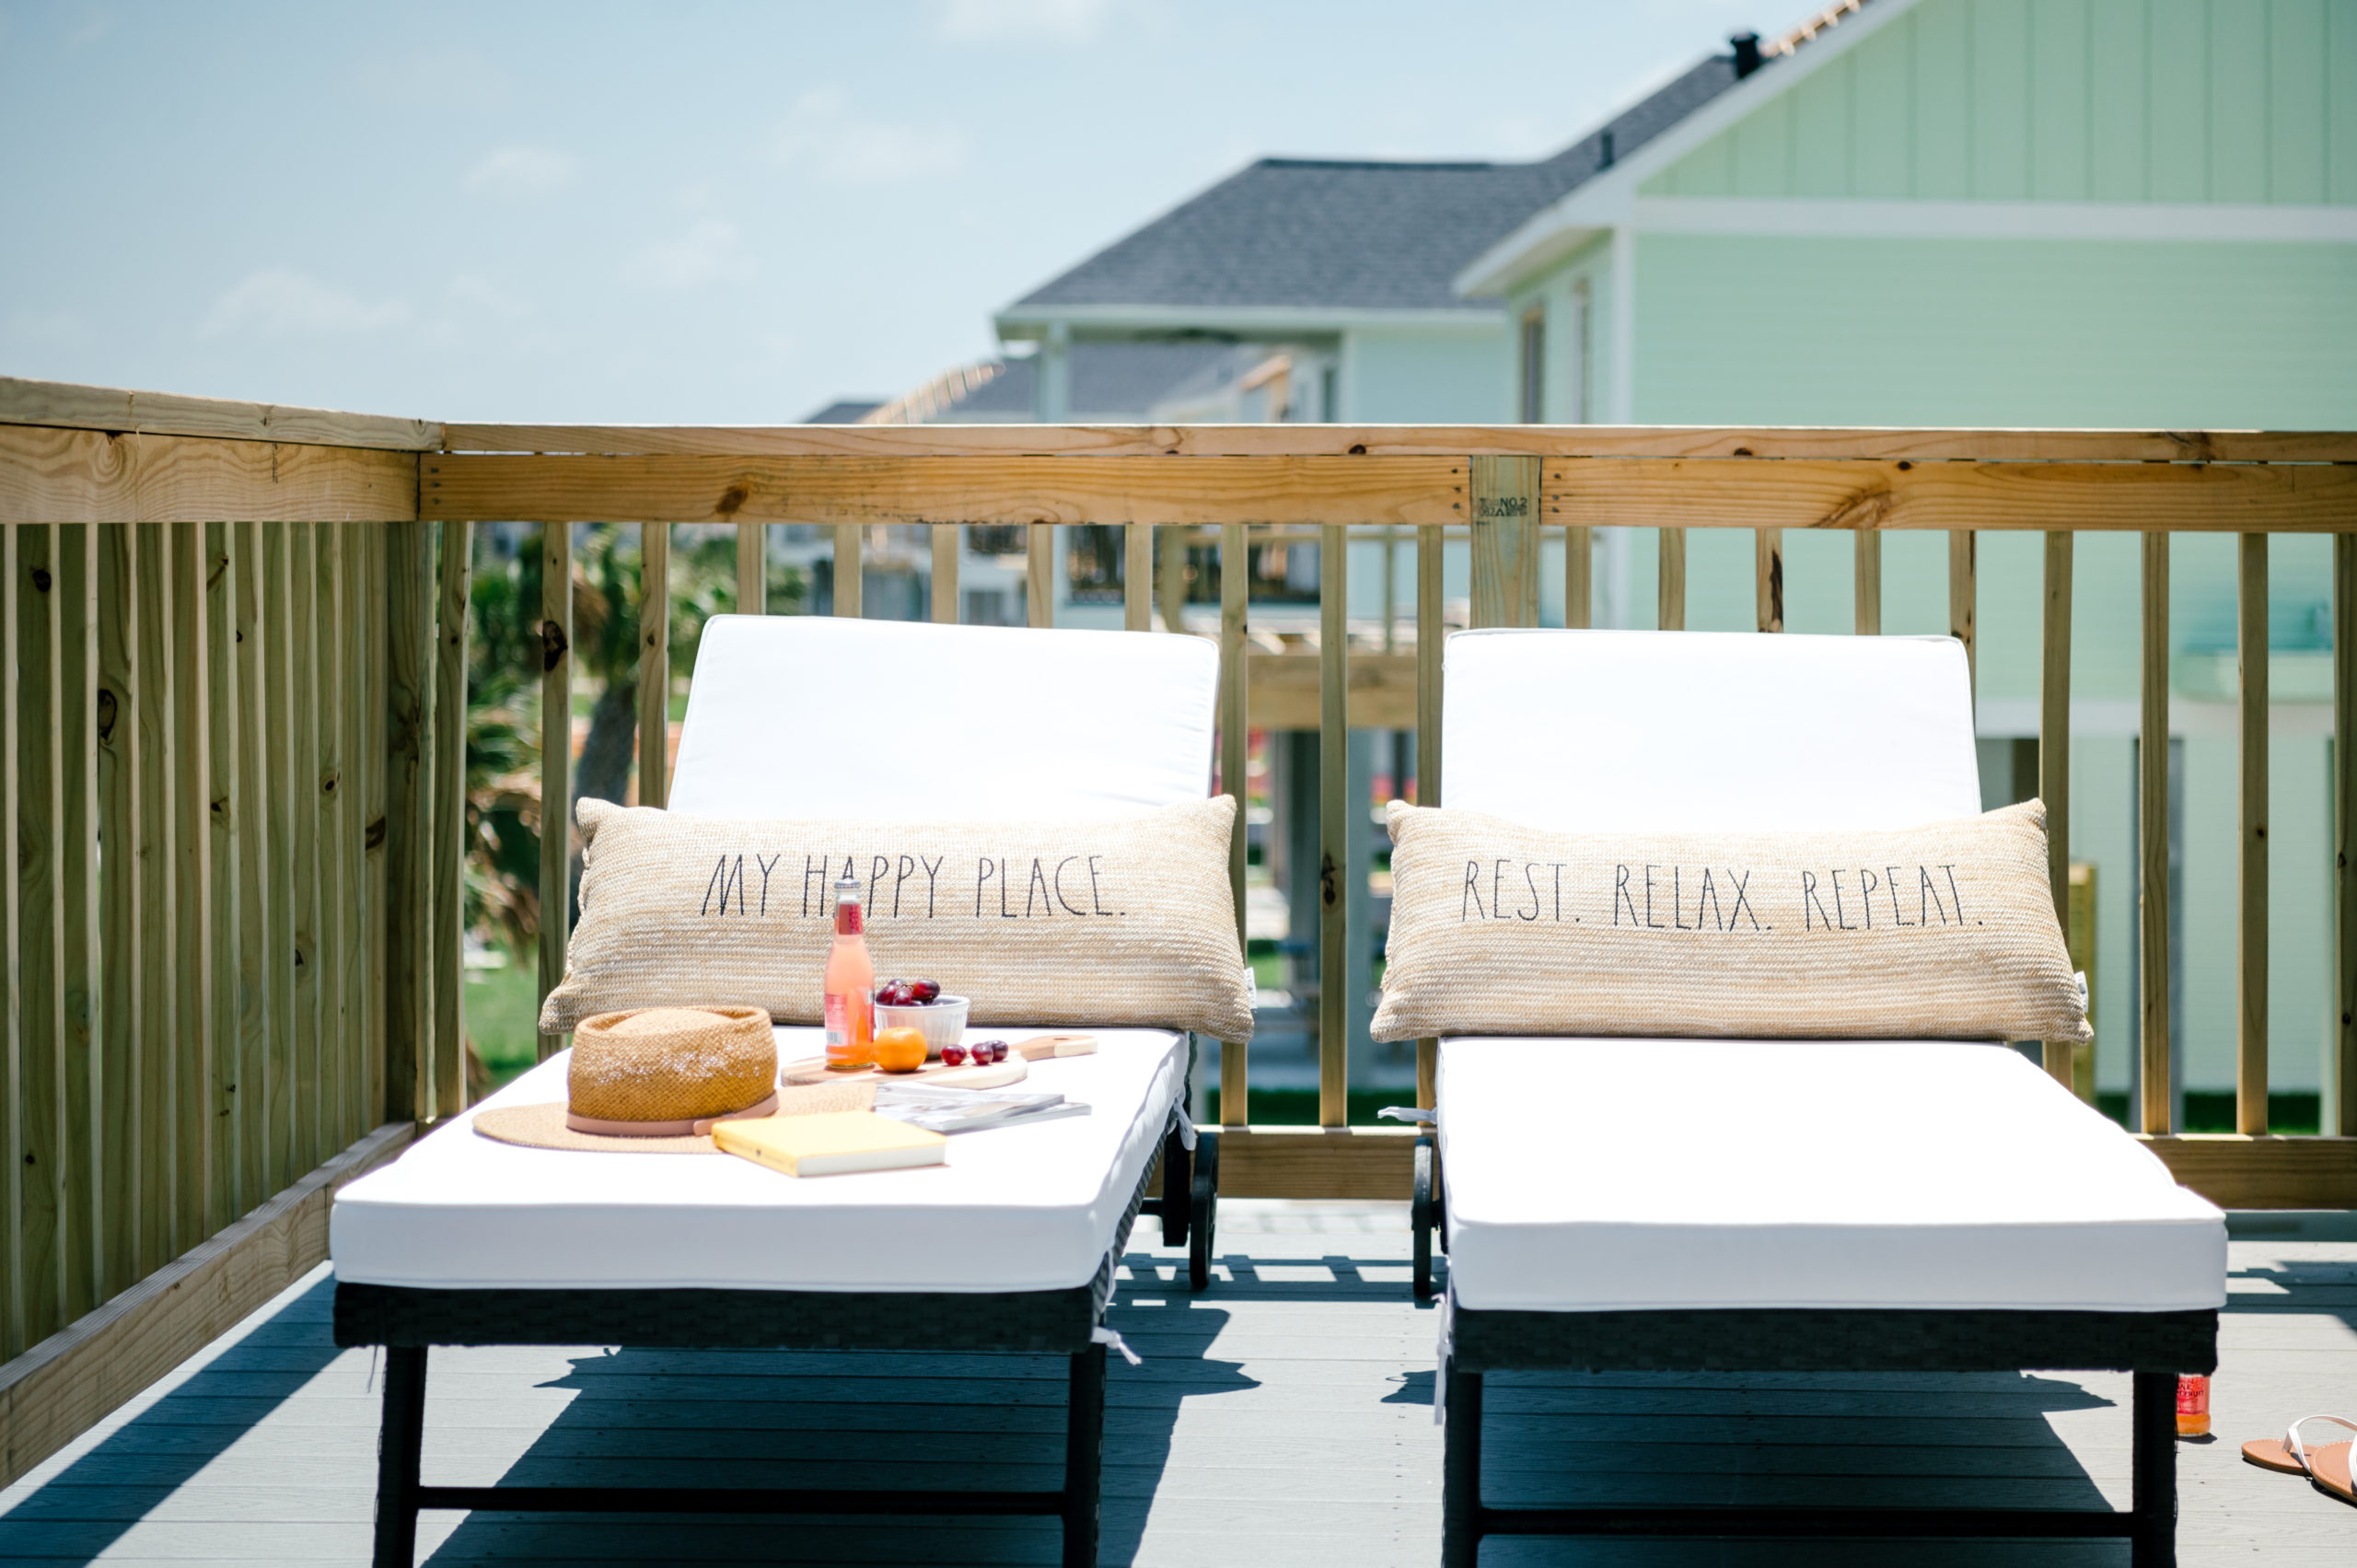 Vacation Rental Photography photos ofOutdoor lounge chairs with tan pillows reading "Happy place" sitting on the balcony